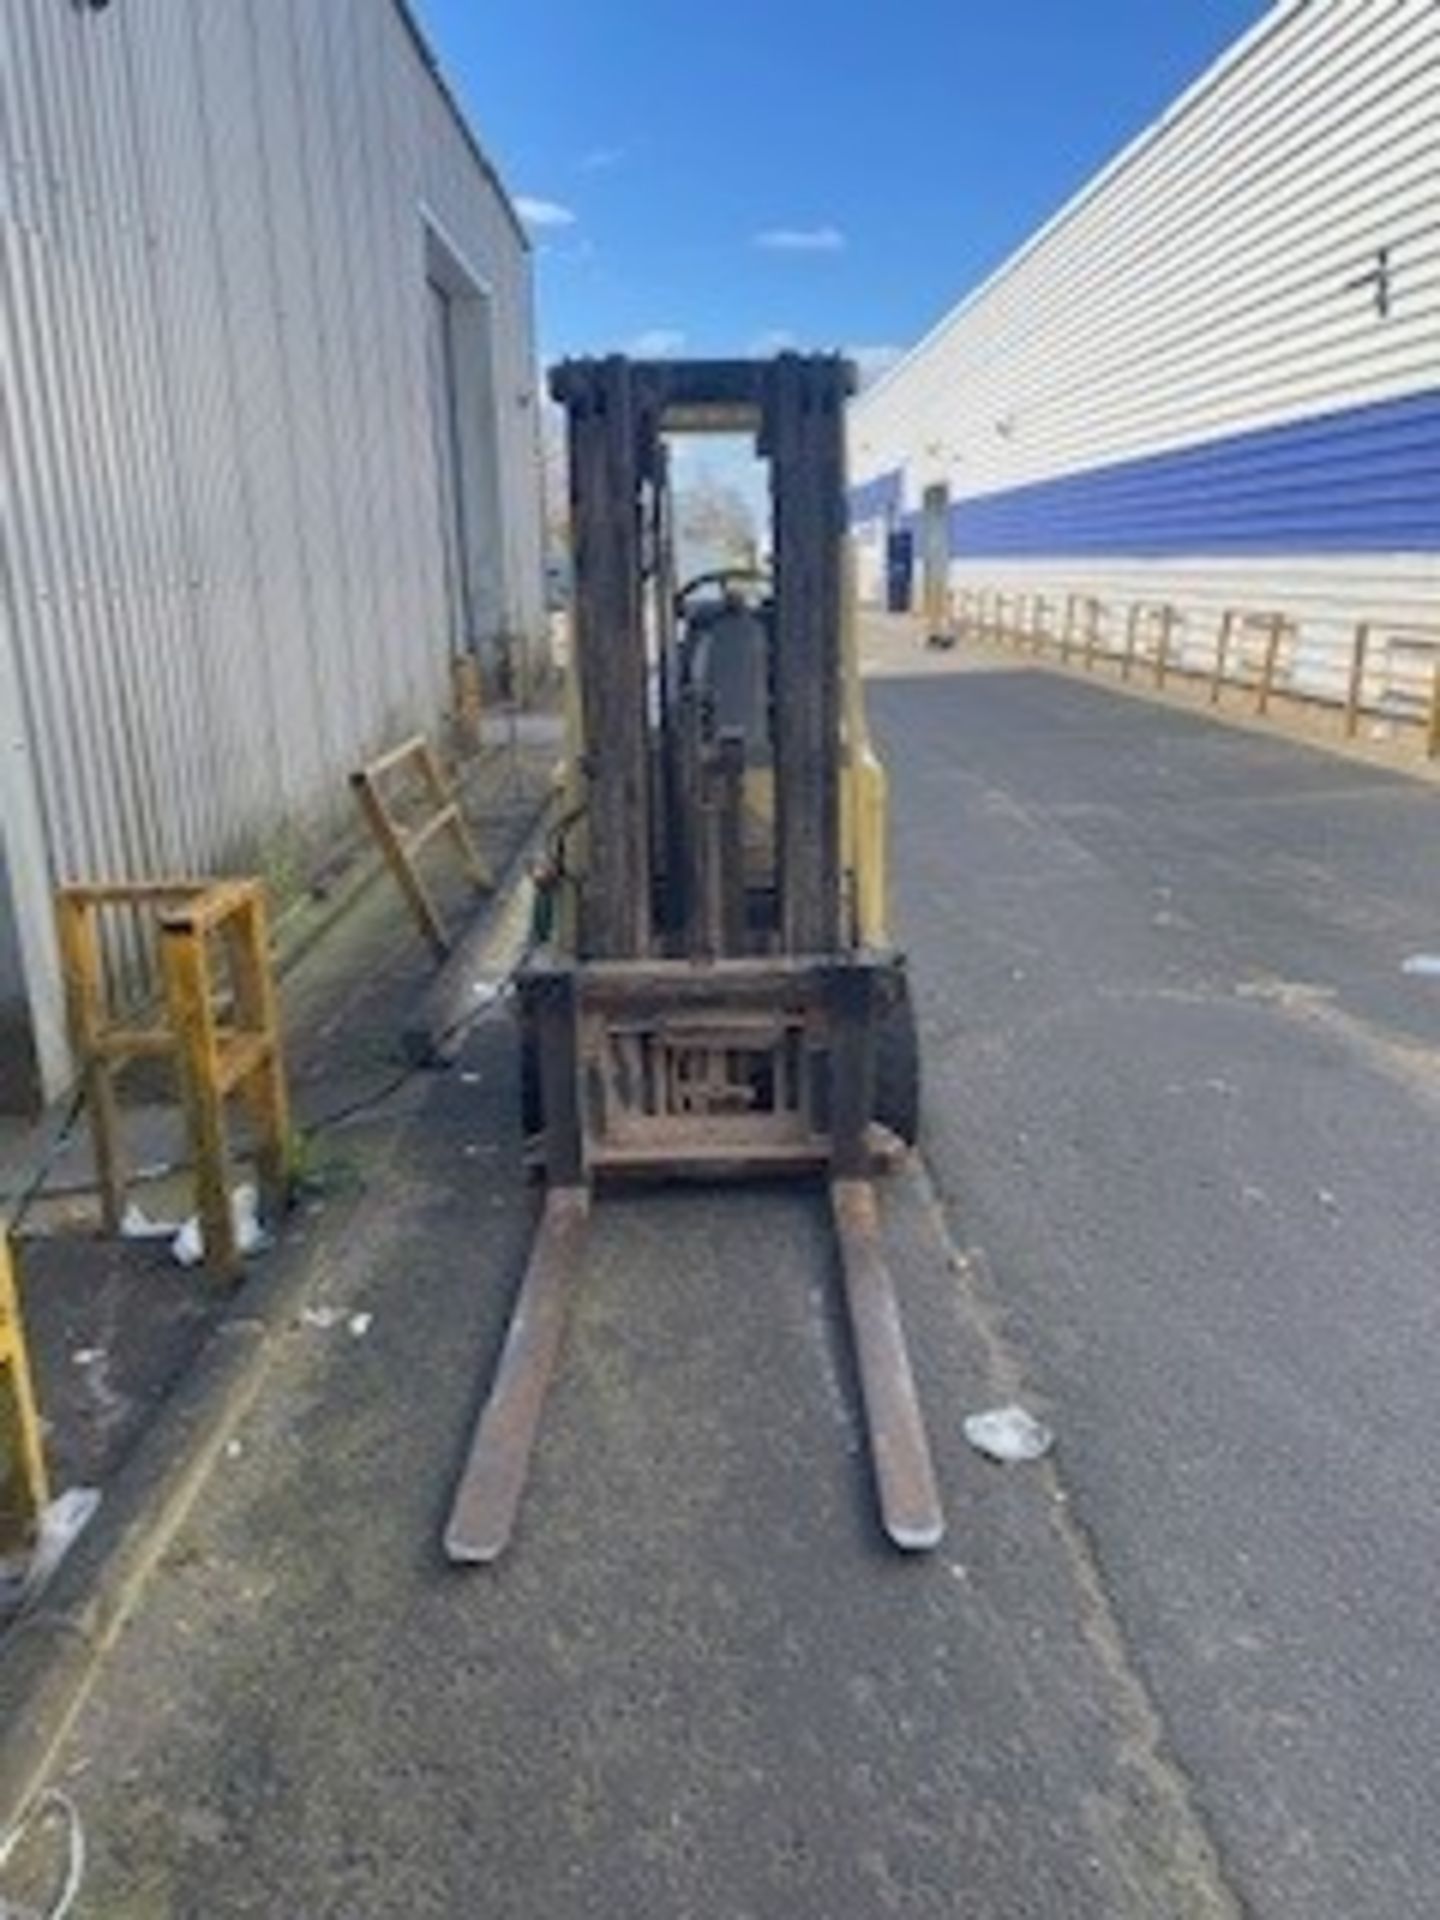 Hyster Electric Forklift Truck Model E3.00XM-847 **will required to be retained until site cleared* - Image 3 of 4